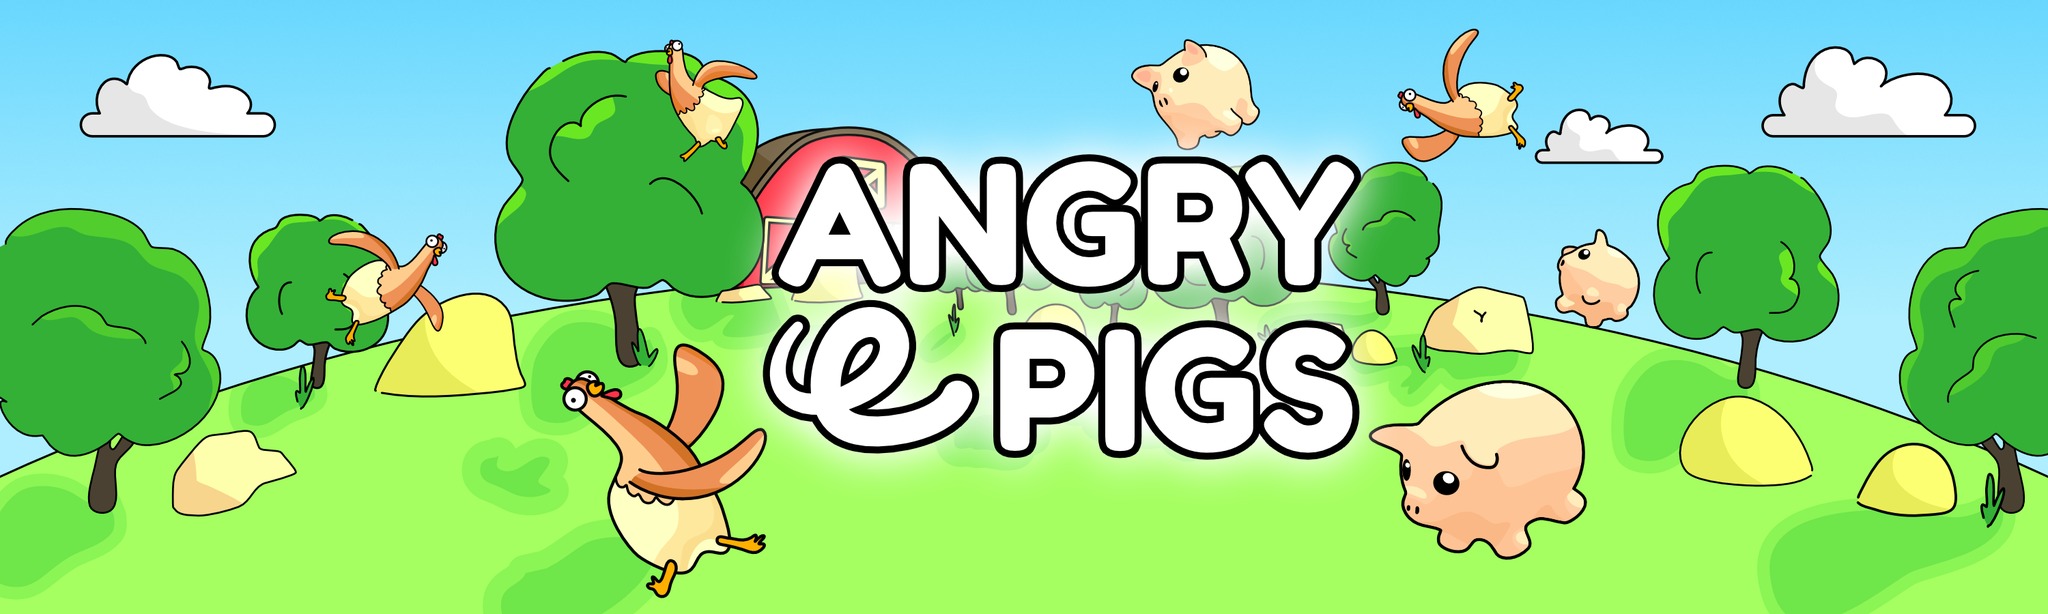 angry pigs game